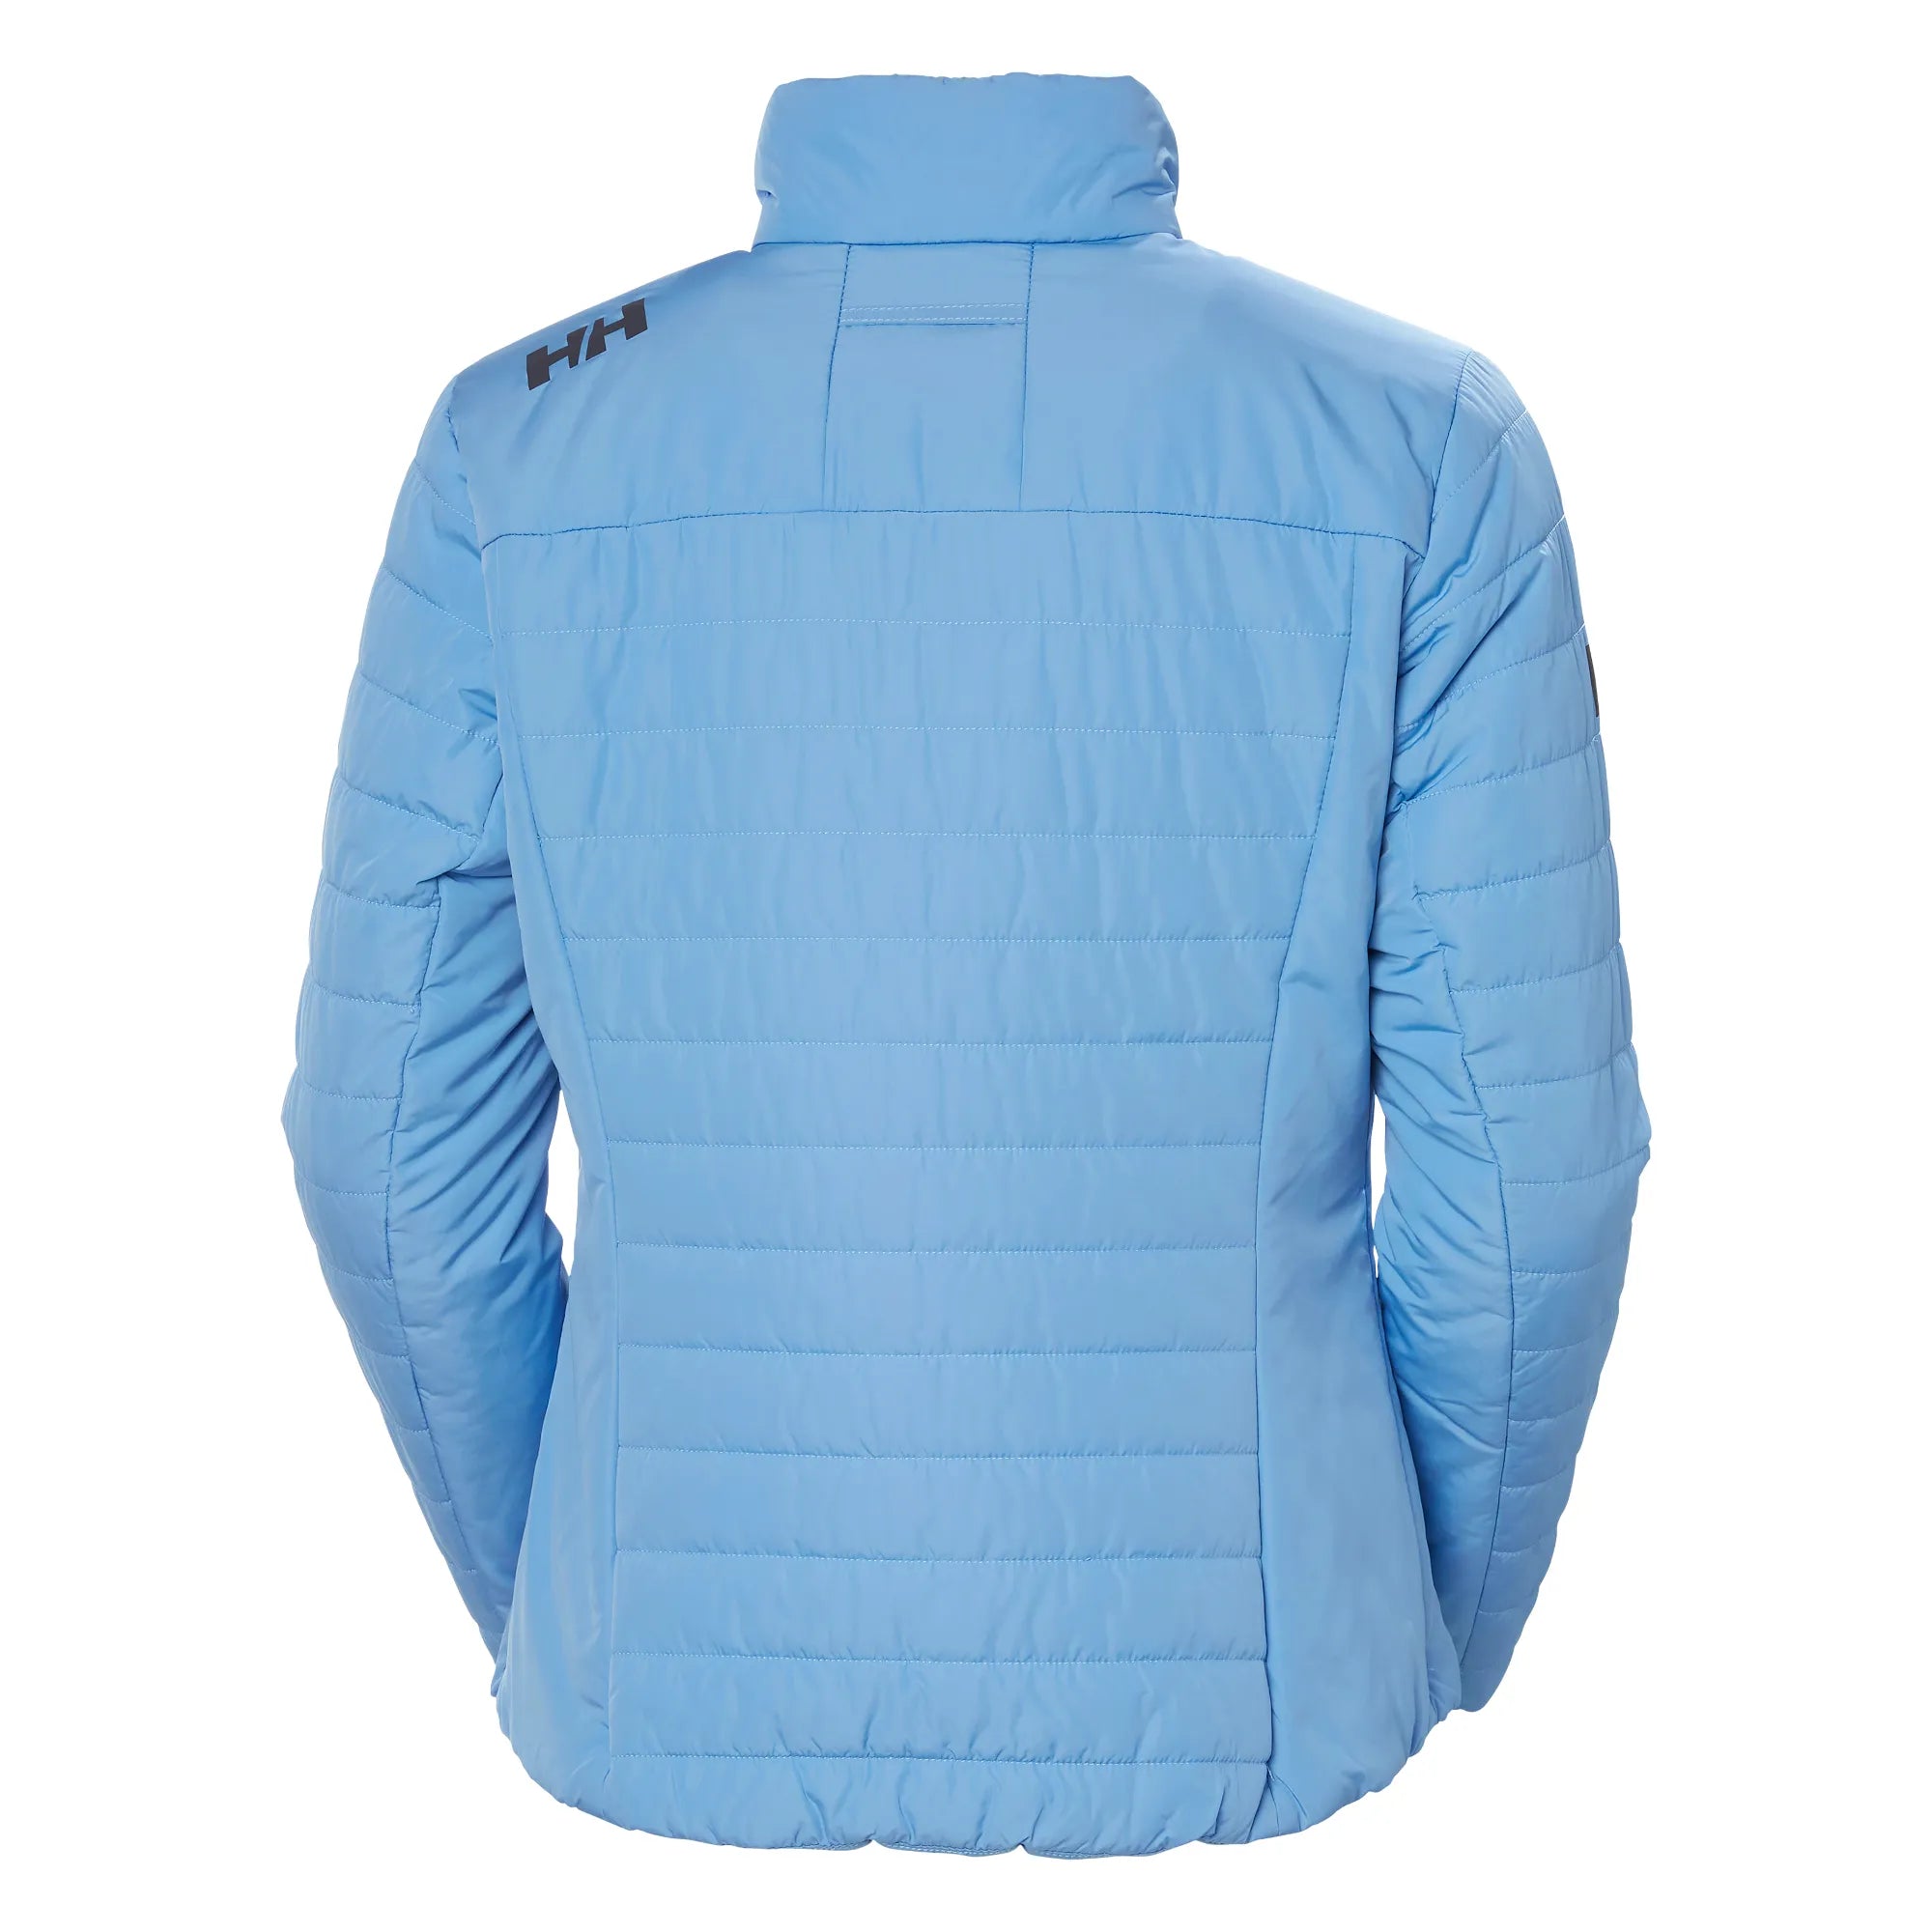 Womens Crew Insulated Sailing Jacket - Bright Blue